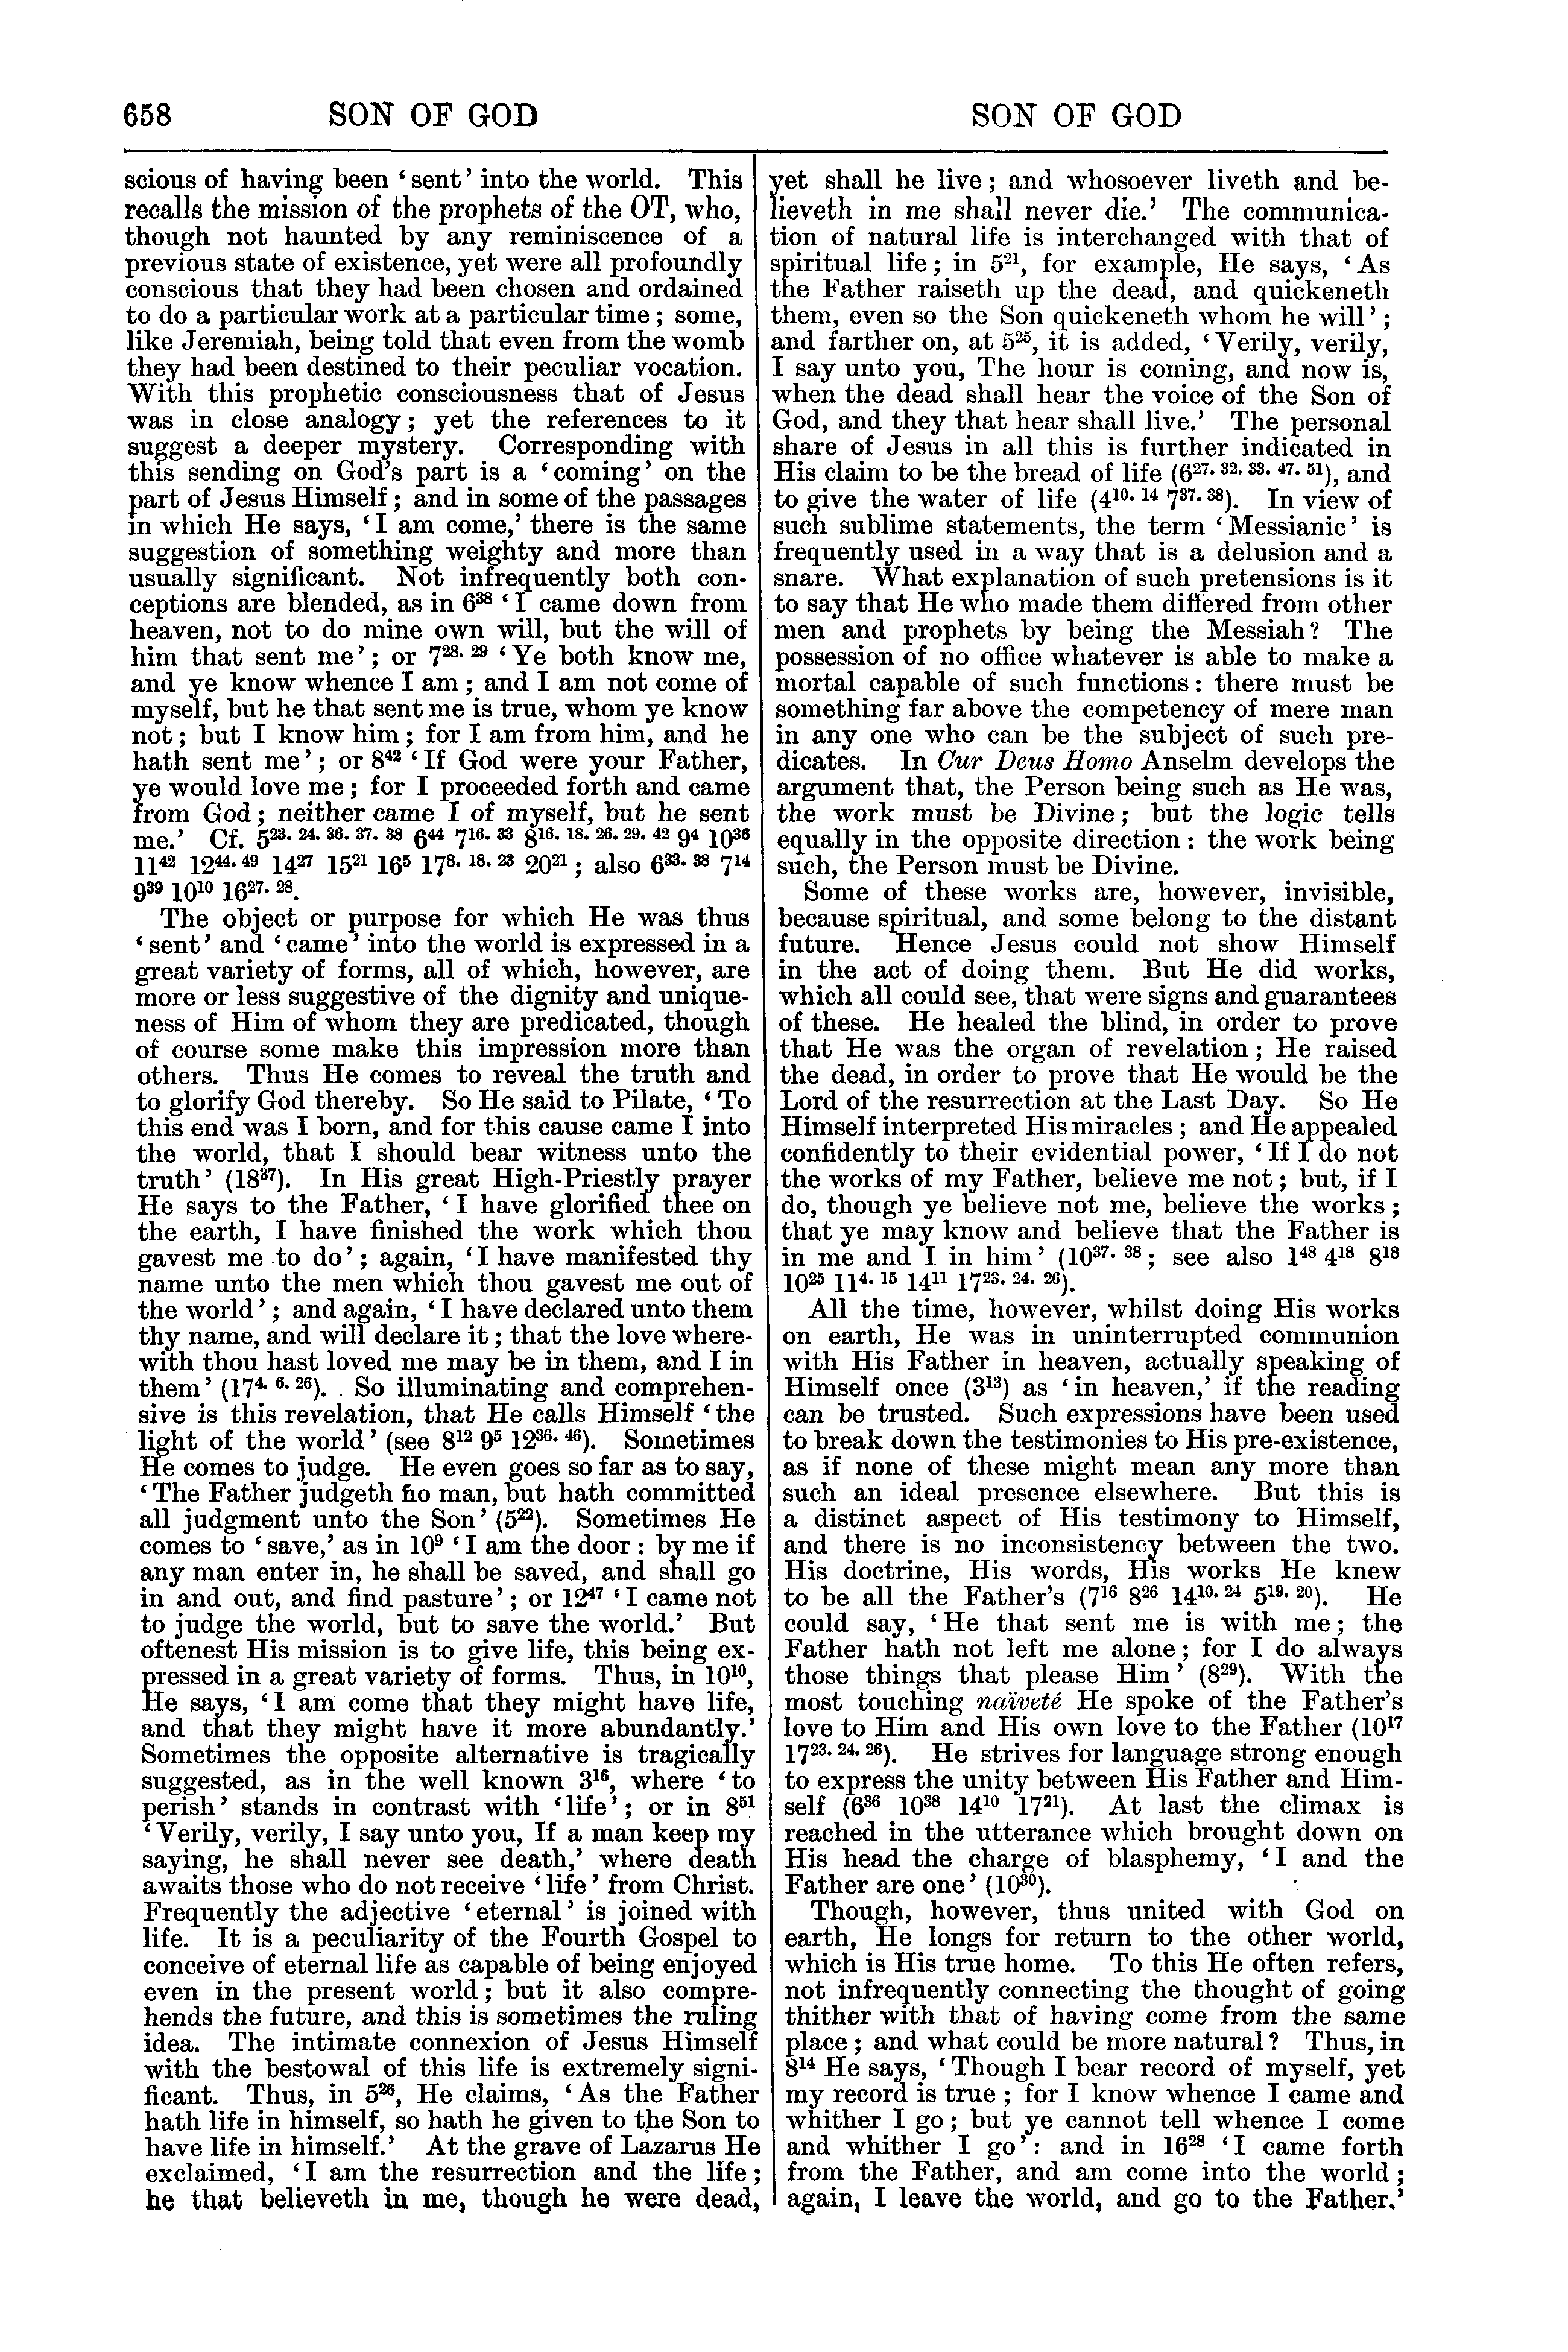 Image of page 658